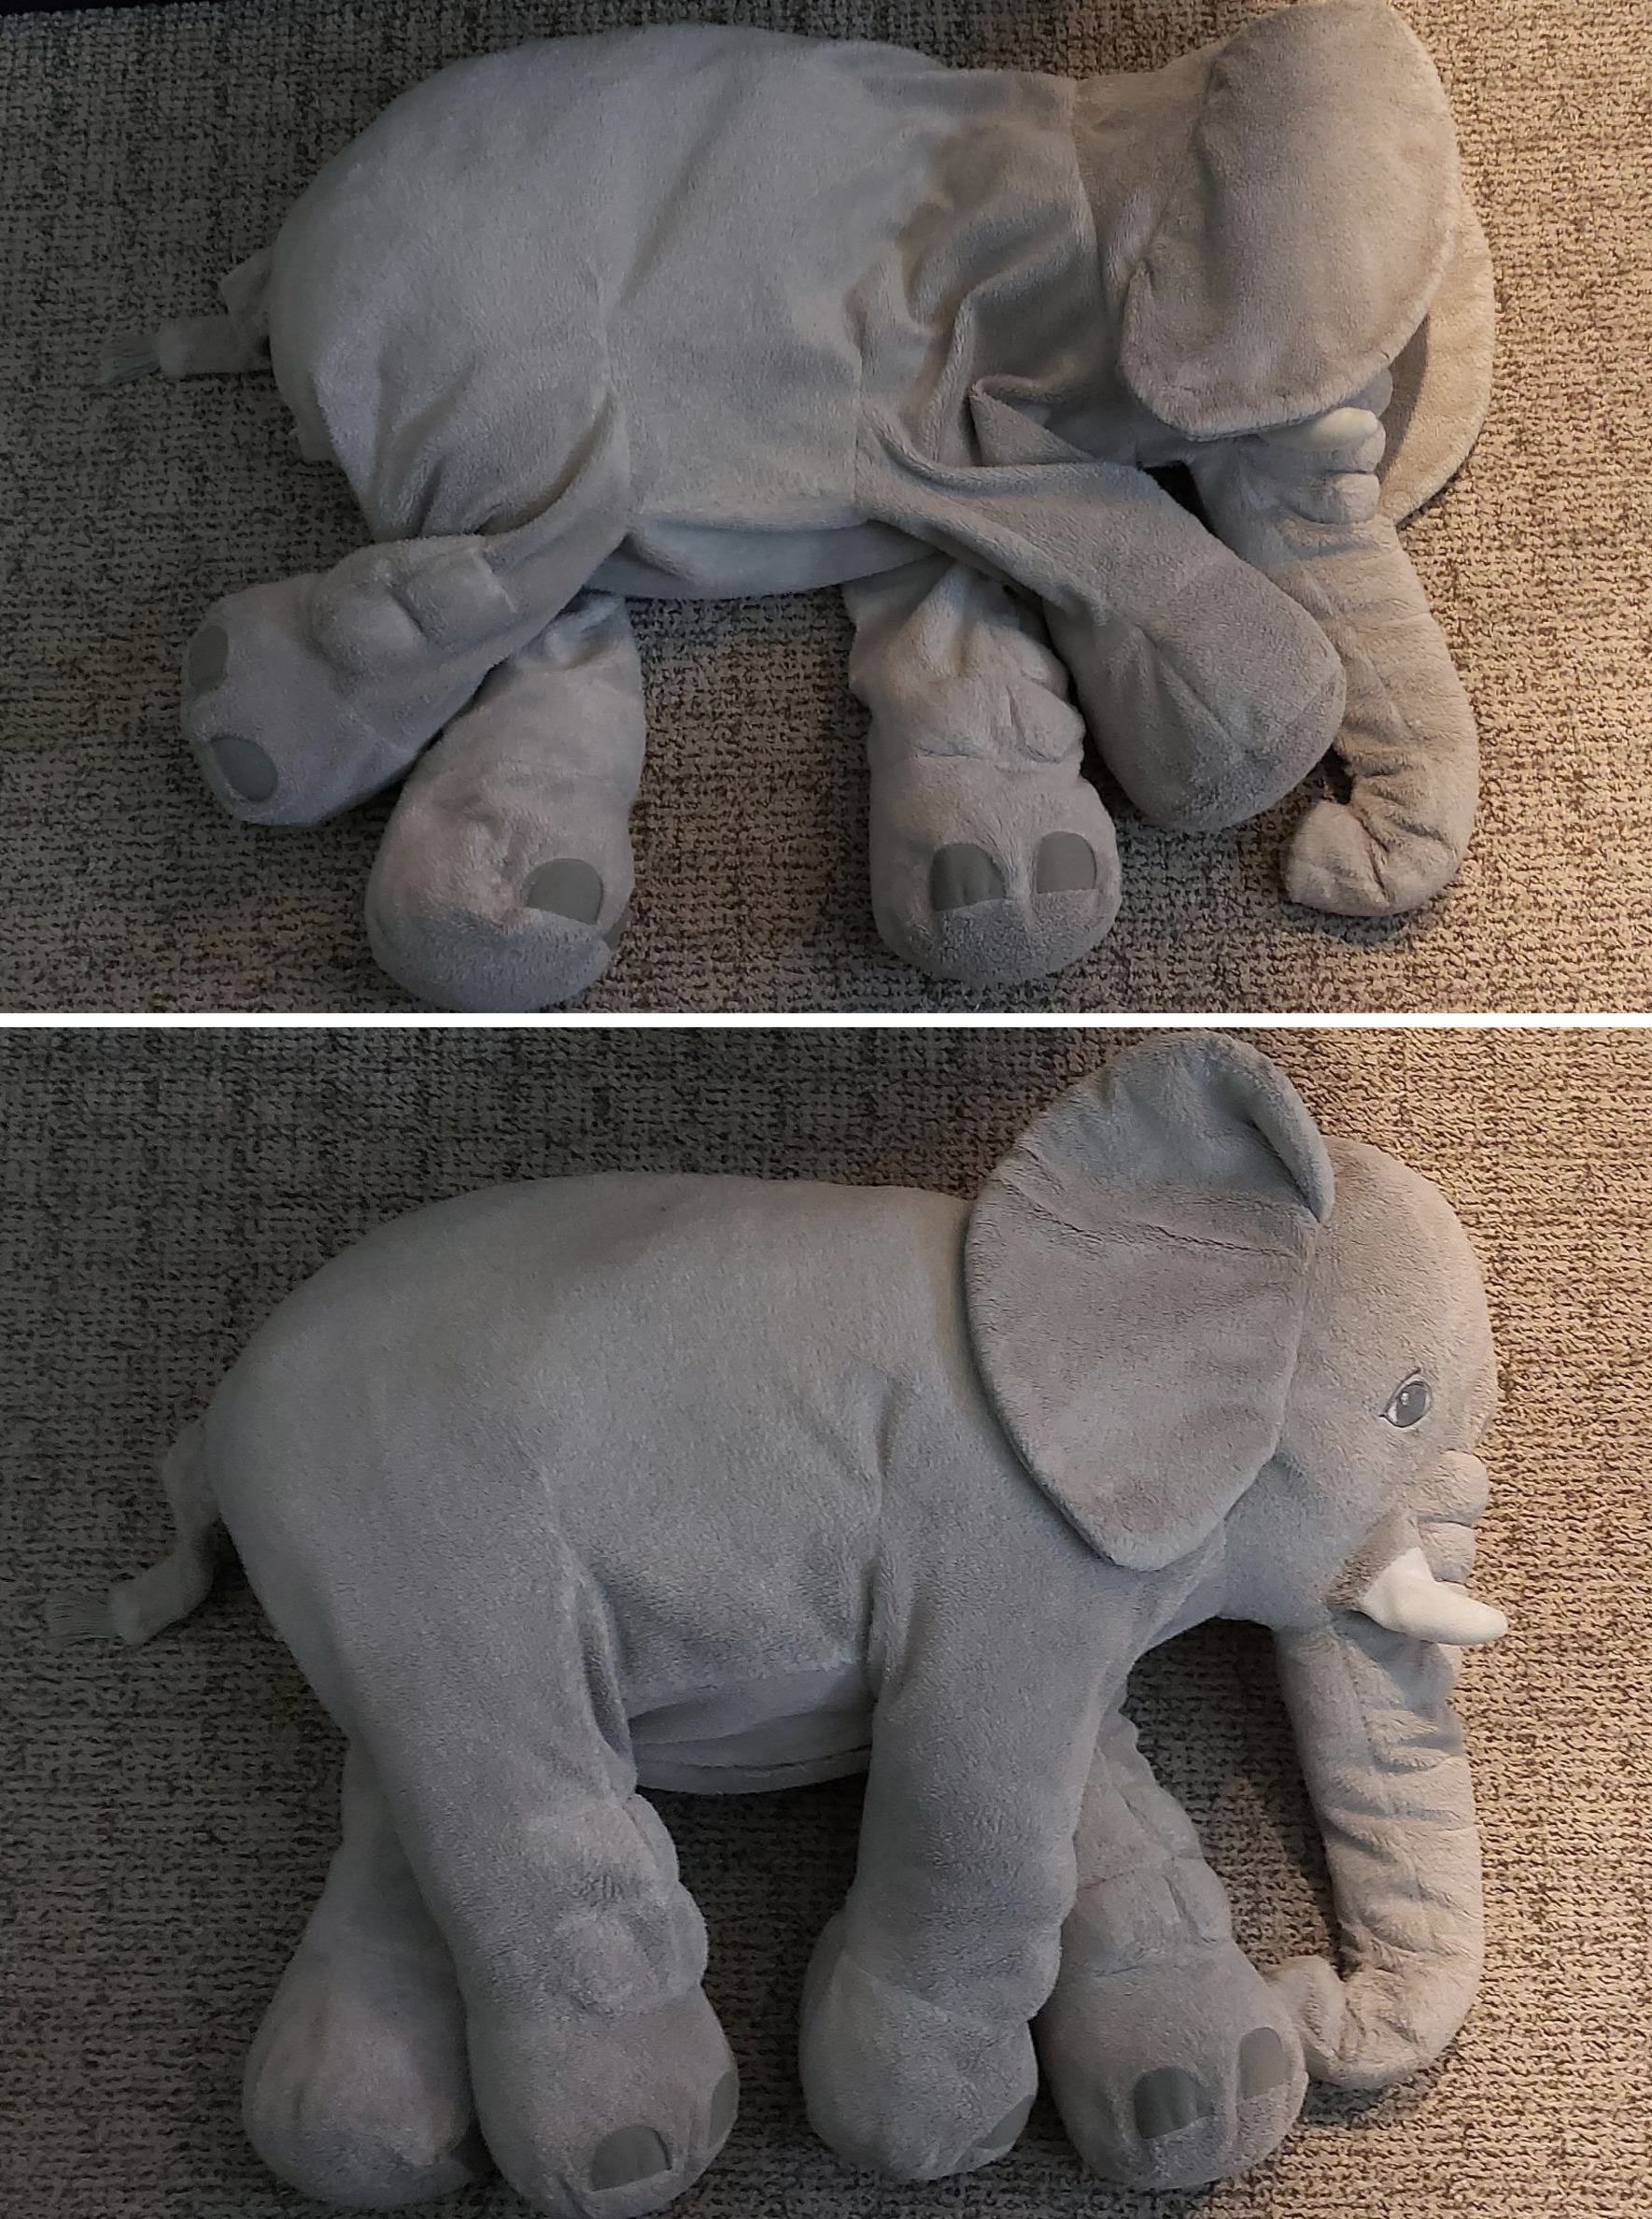 reviewer&#x27;s stuffed toy elephant before, looking droopy and floppy, and after more stuffing, looking fluffier and fuller